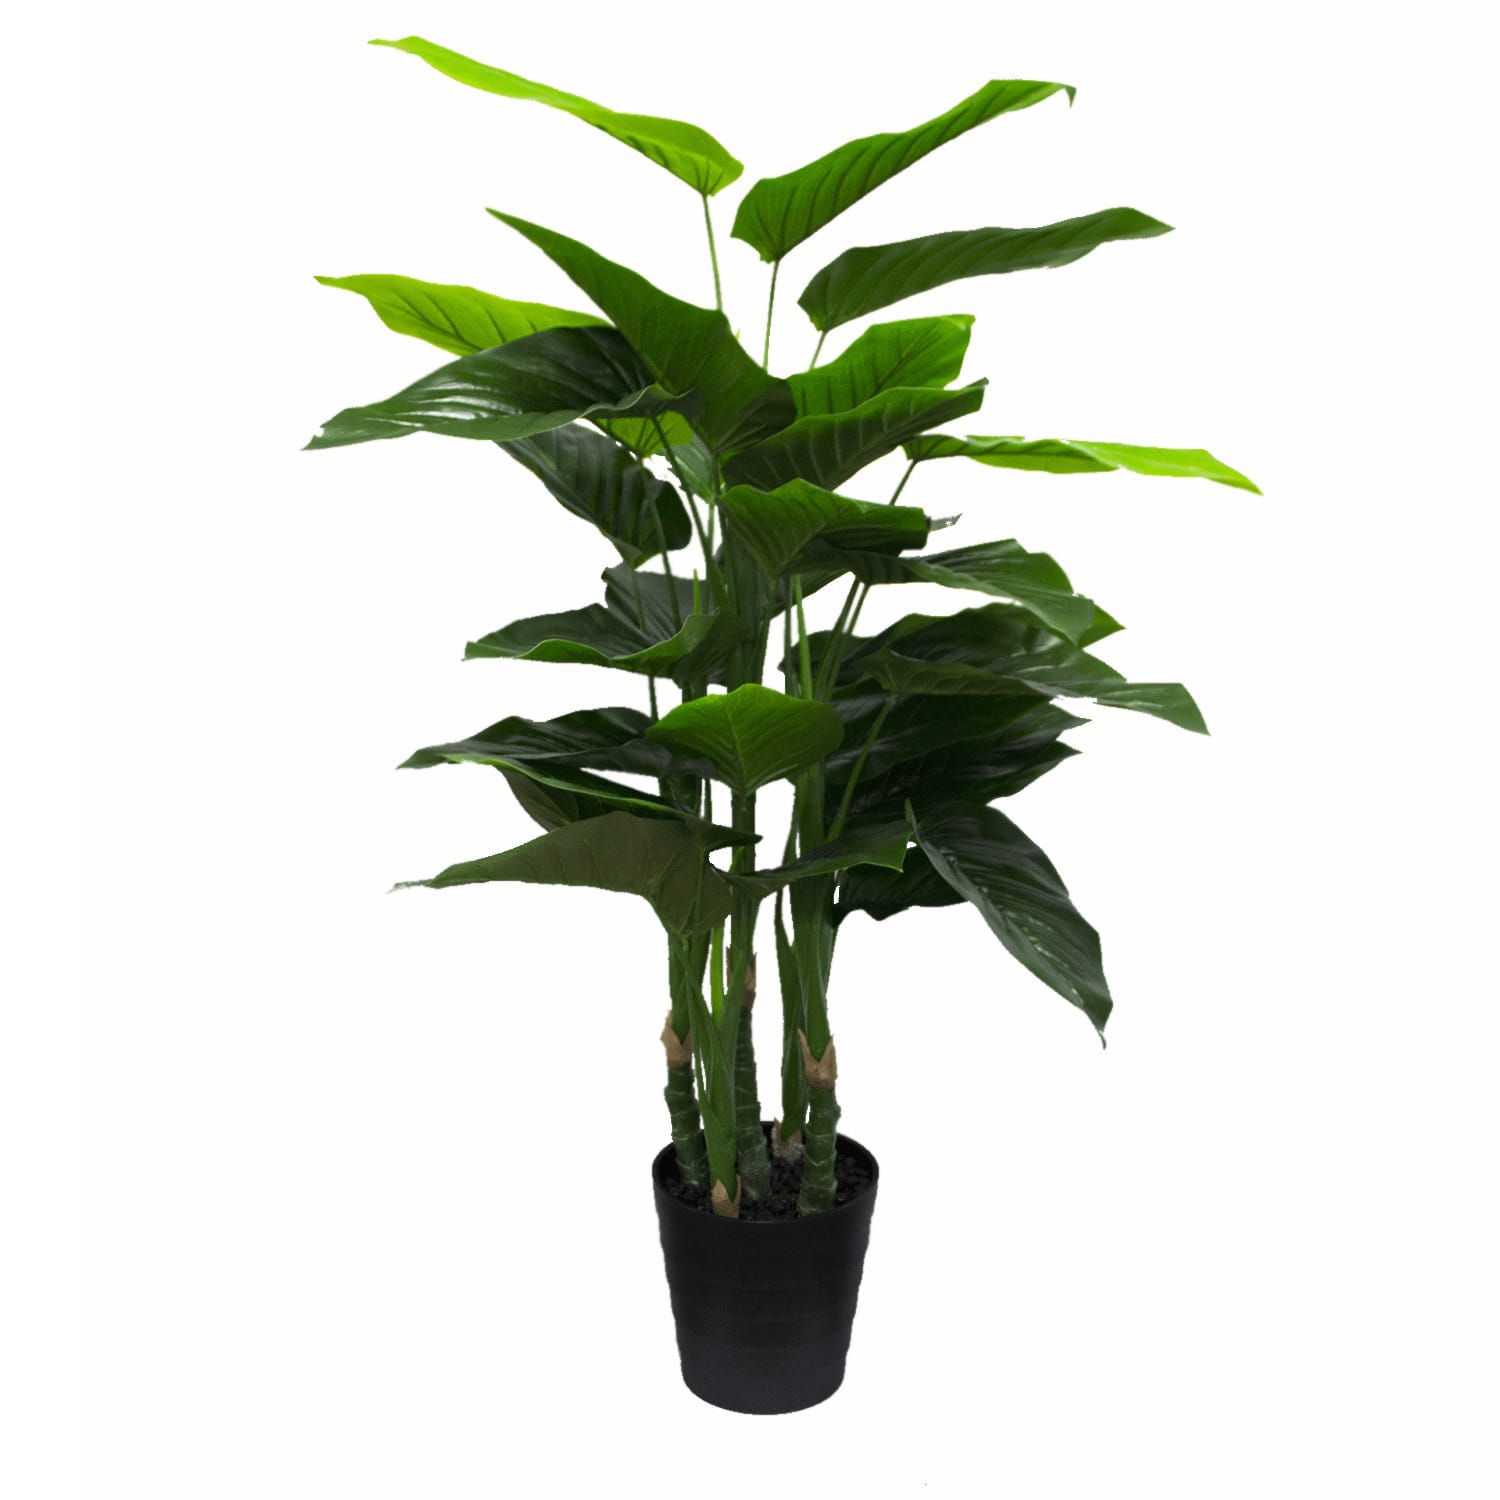 Artificial Philodendron Plant. Add some life and greenery to your event space with this large-sized artificial leafy potted plant.